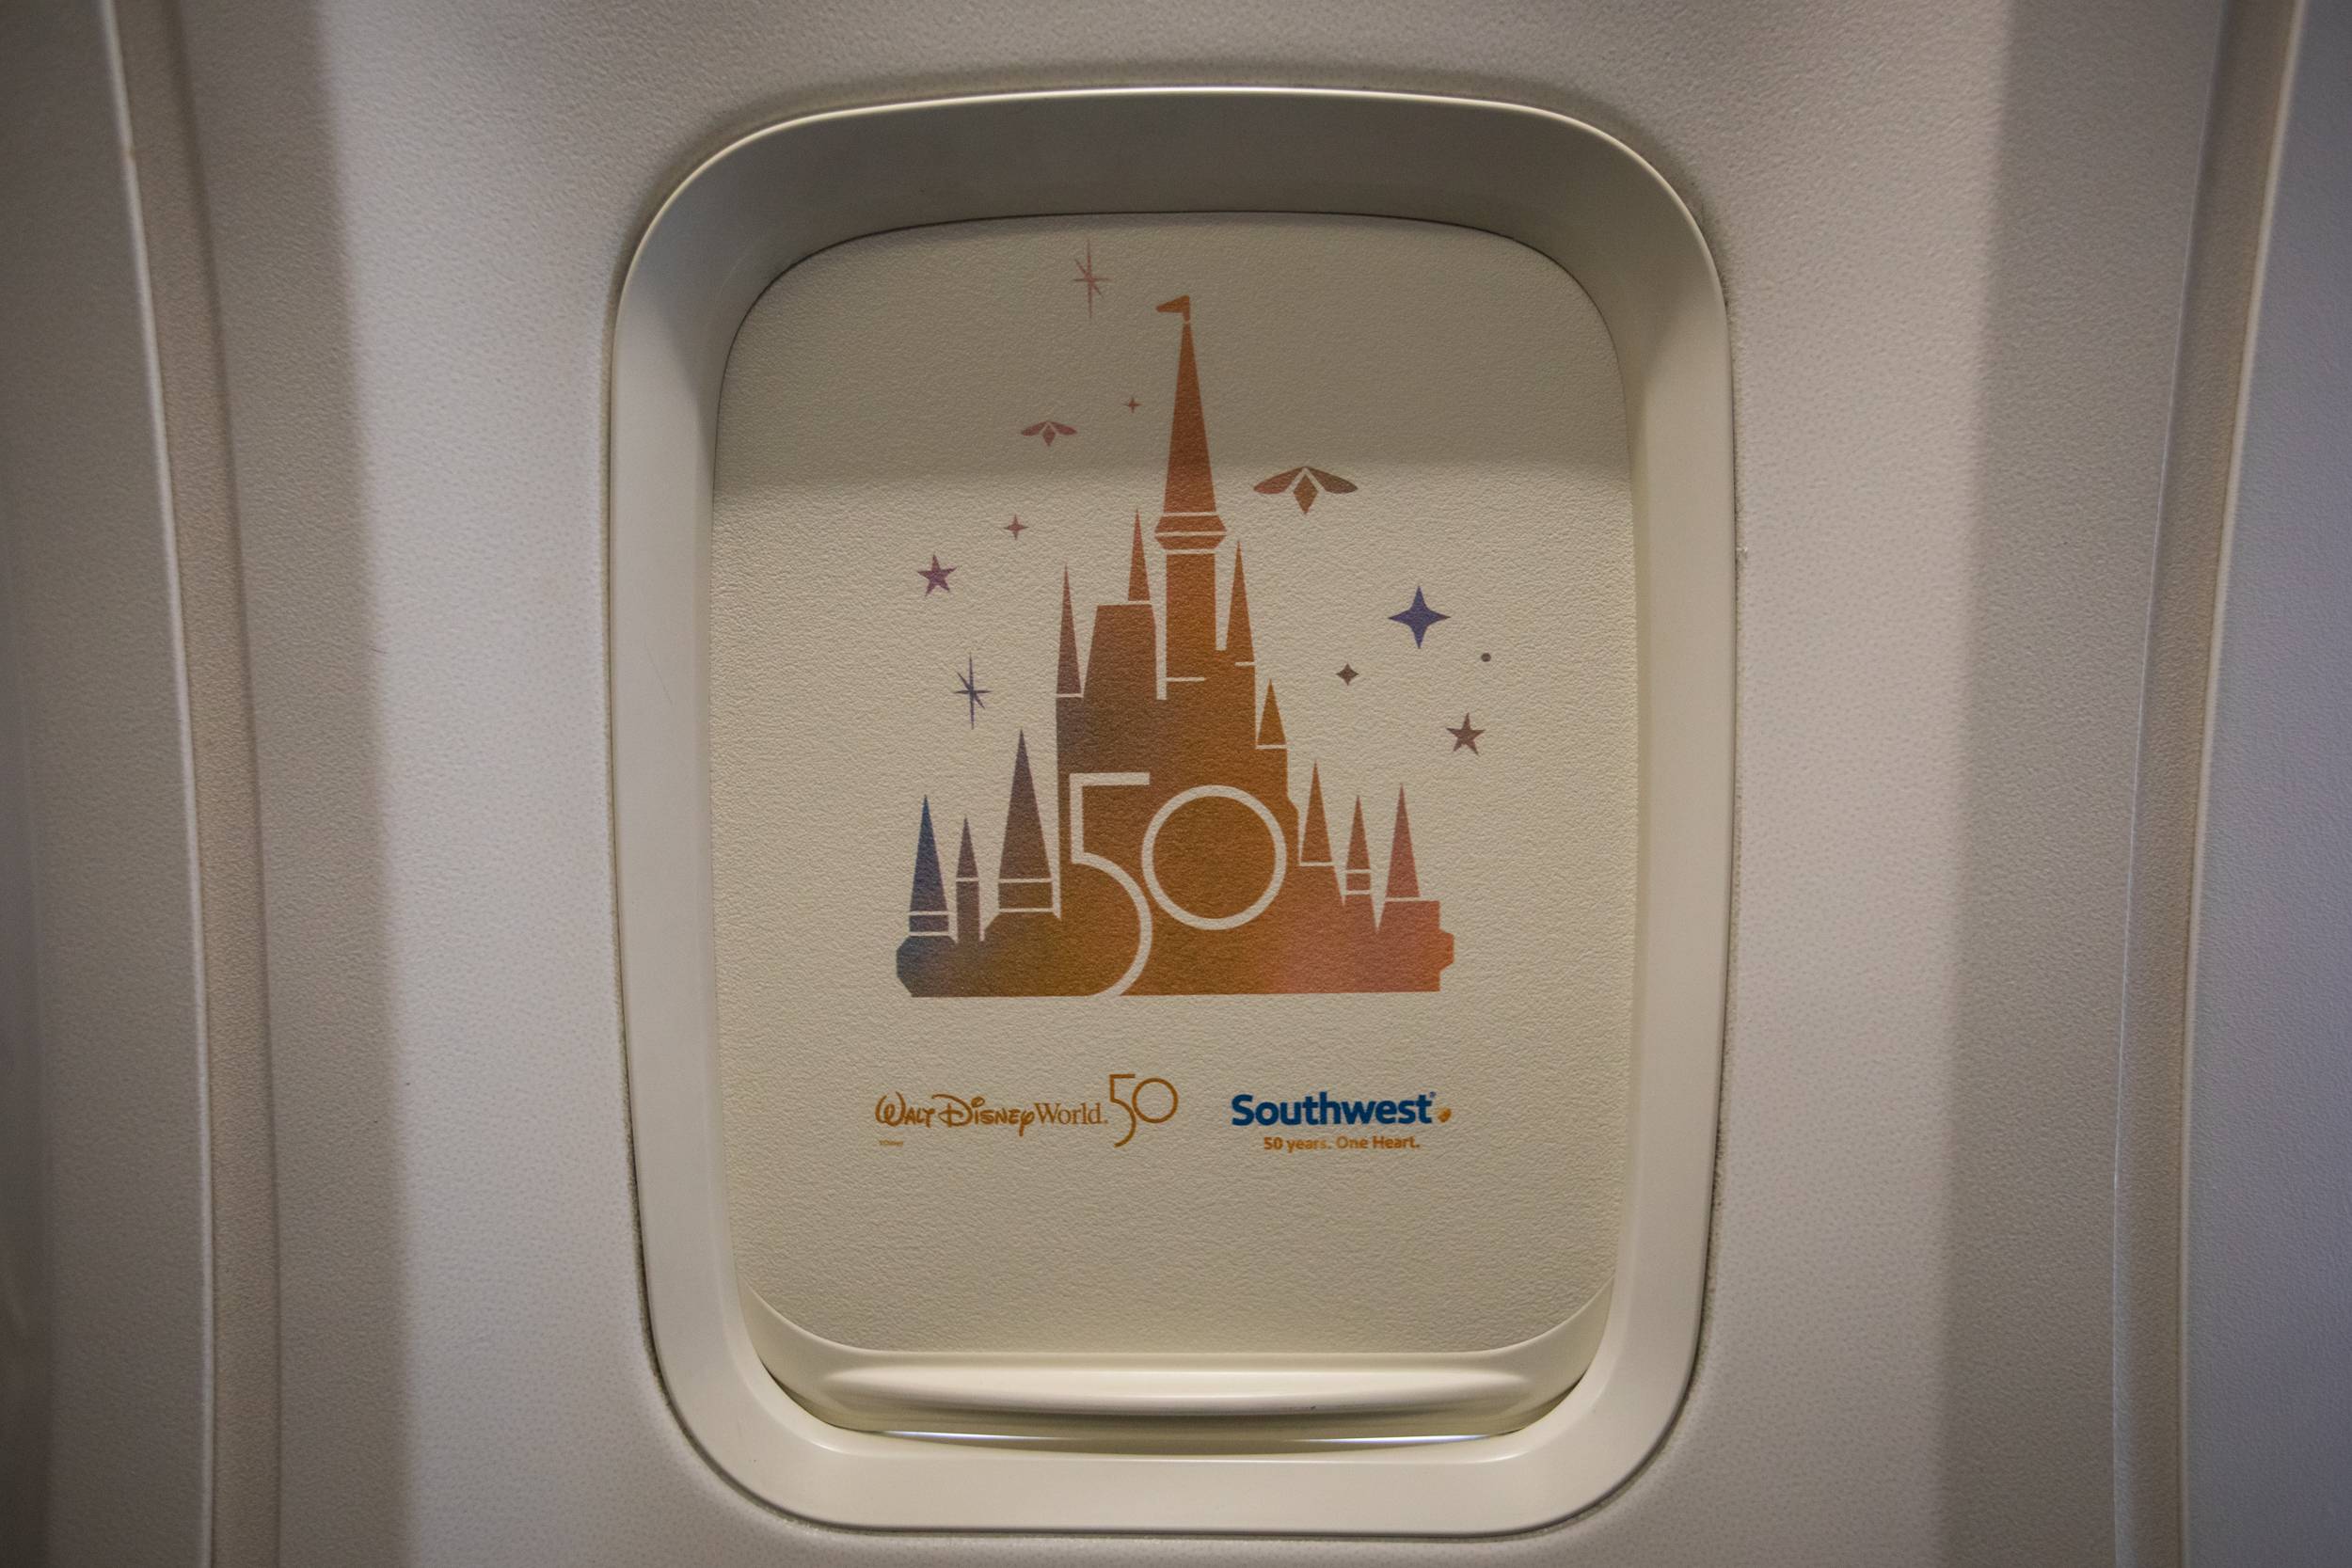 Southwest Airlines and Walt Disney World Resort 50th Anniversary Commemorative Aircraft